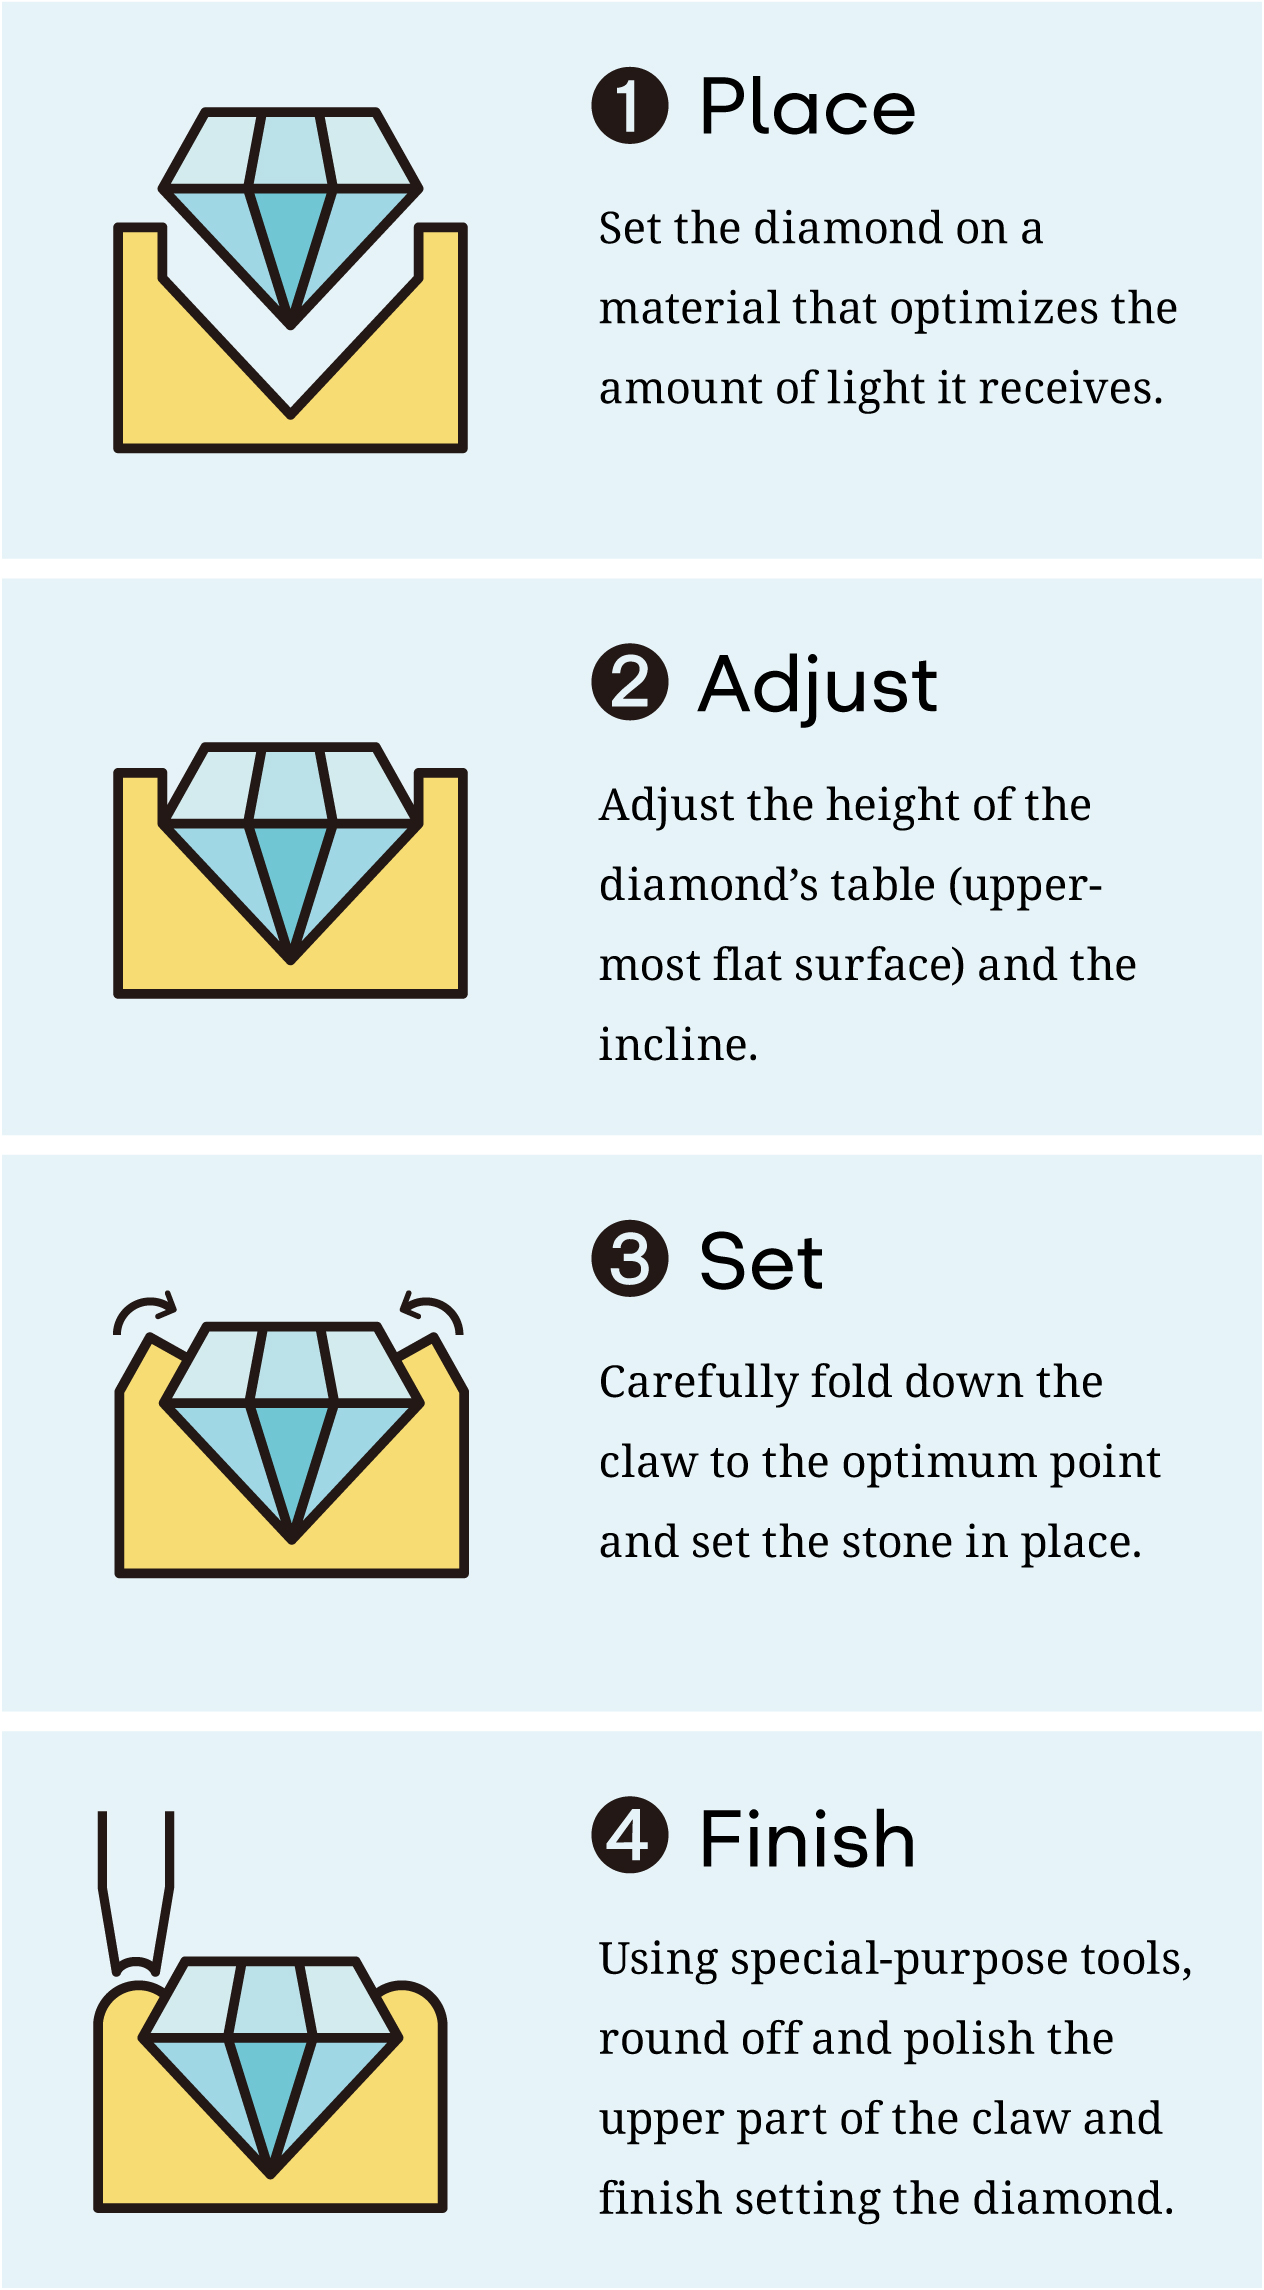 1. Place: Set the diamond on a material that optimizes the amount of light it receives. 2. Adjust: Adjust the height of the diamond's table (uppermost flat surface) and the incline. 3. Set: Carefully fold down the claw to the optimum point and set the stone in place. 4. Finish: Using special-purpose tools, round off and polish the upper part of the claw and finish setting the diamond.